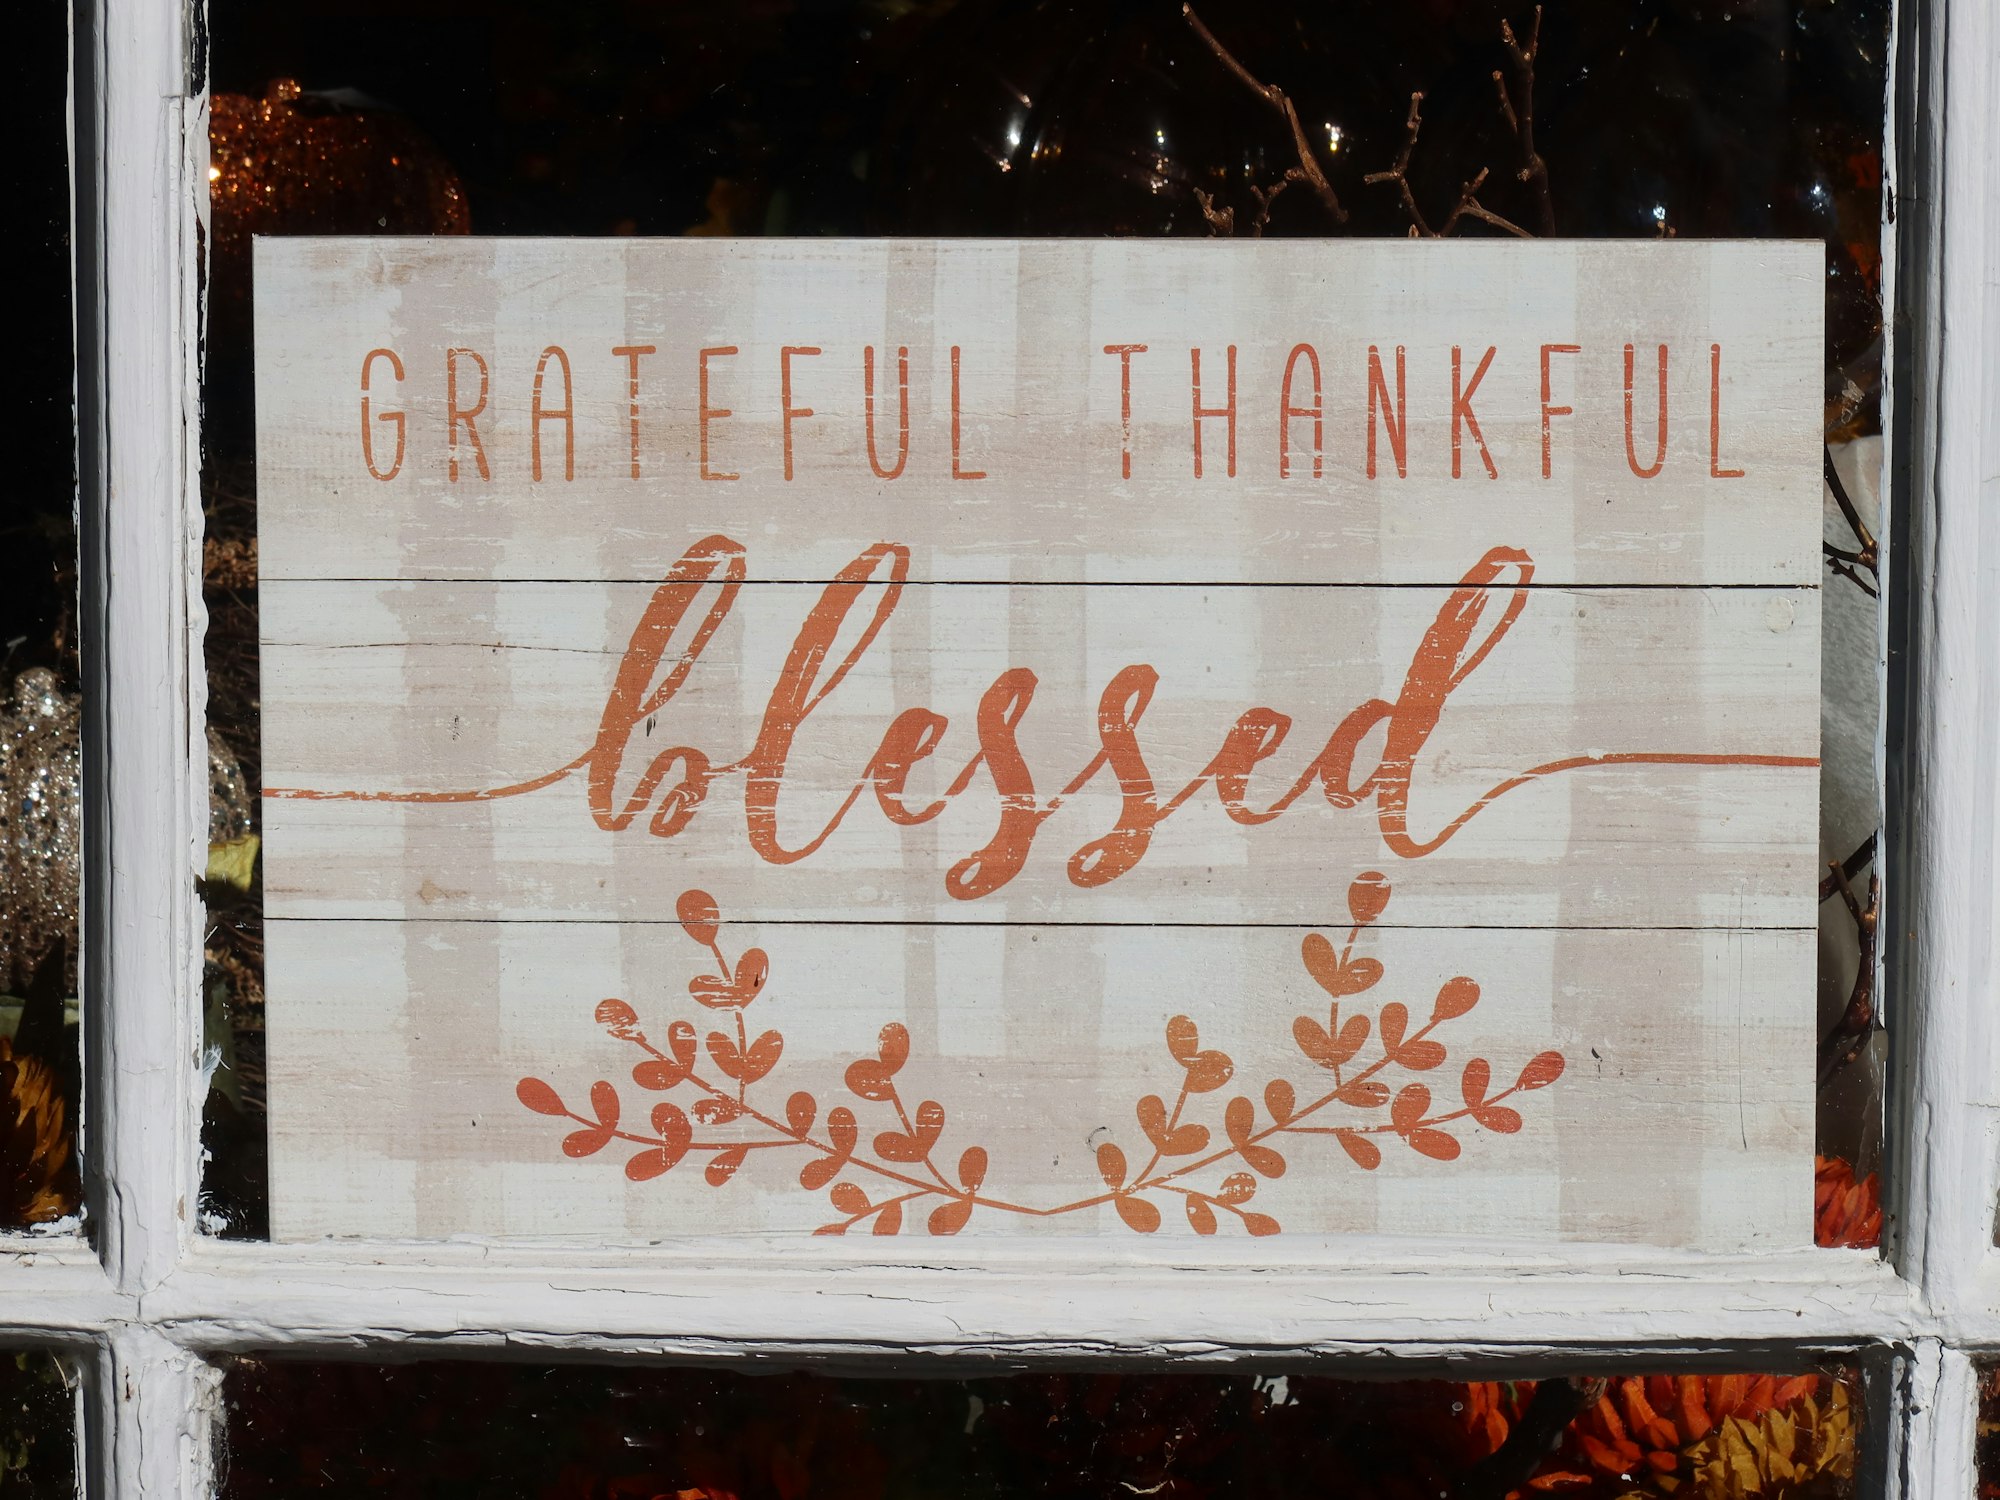 Faith in Caregiving: Overflow with Thankfulness